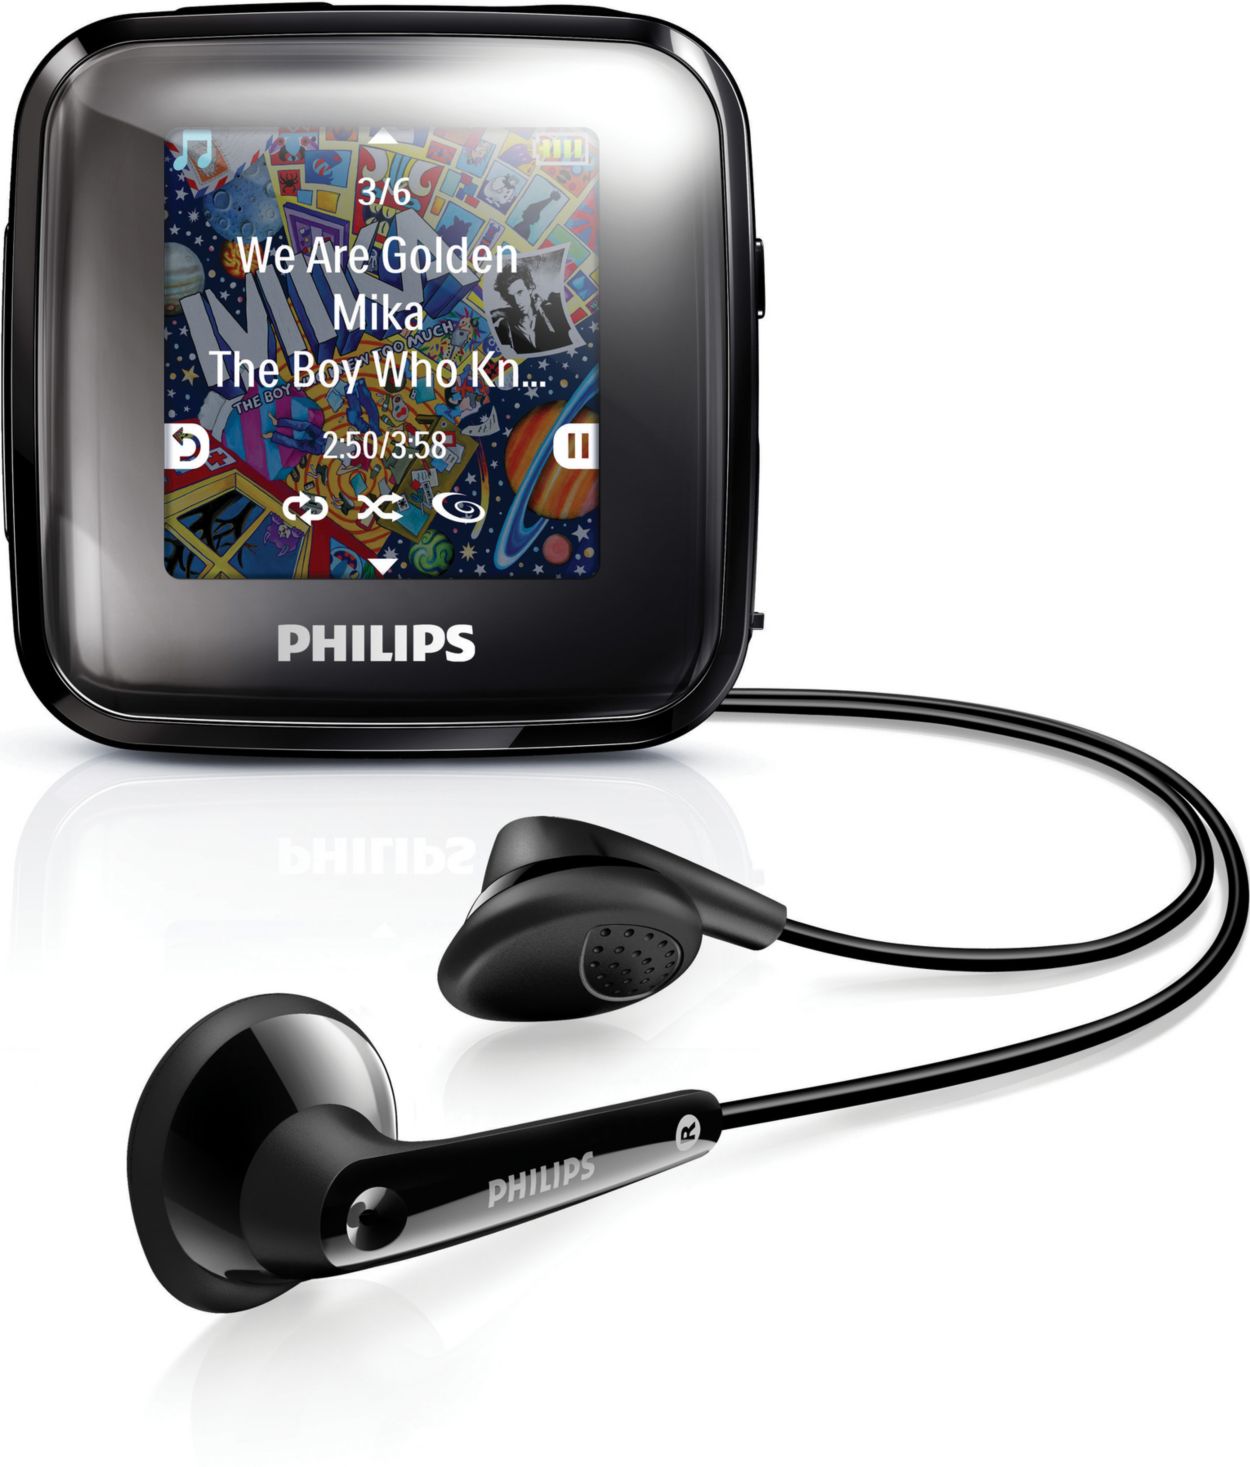 Philips gogear mp3 player driver